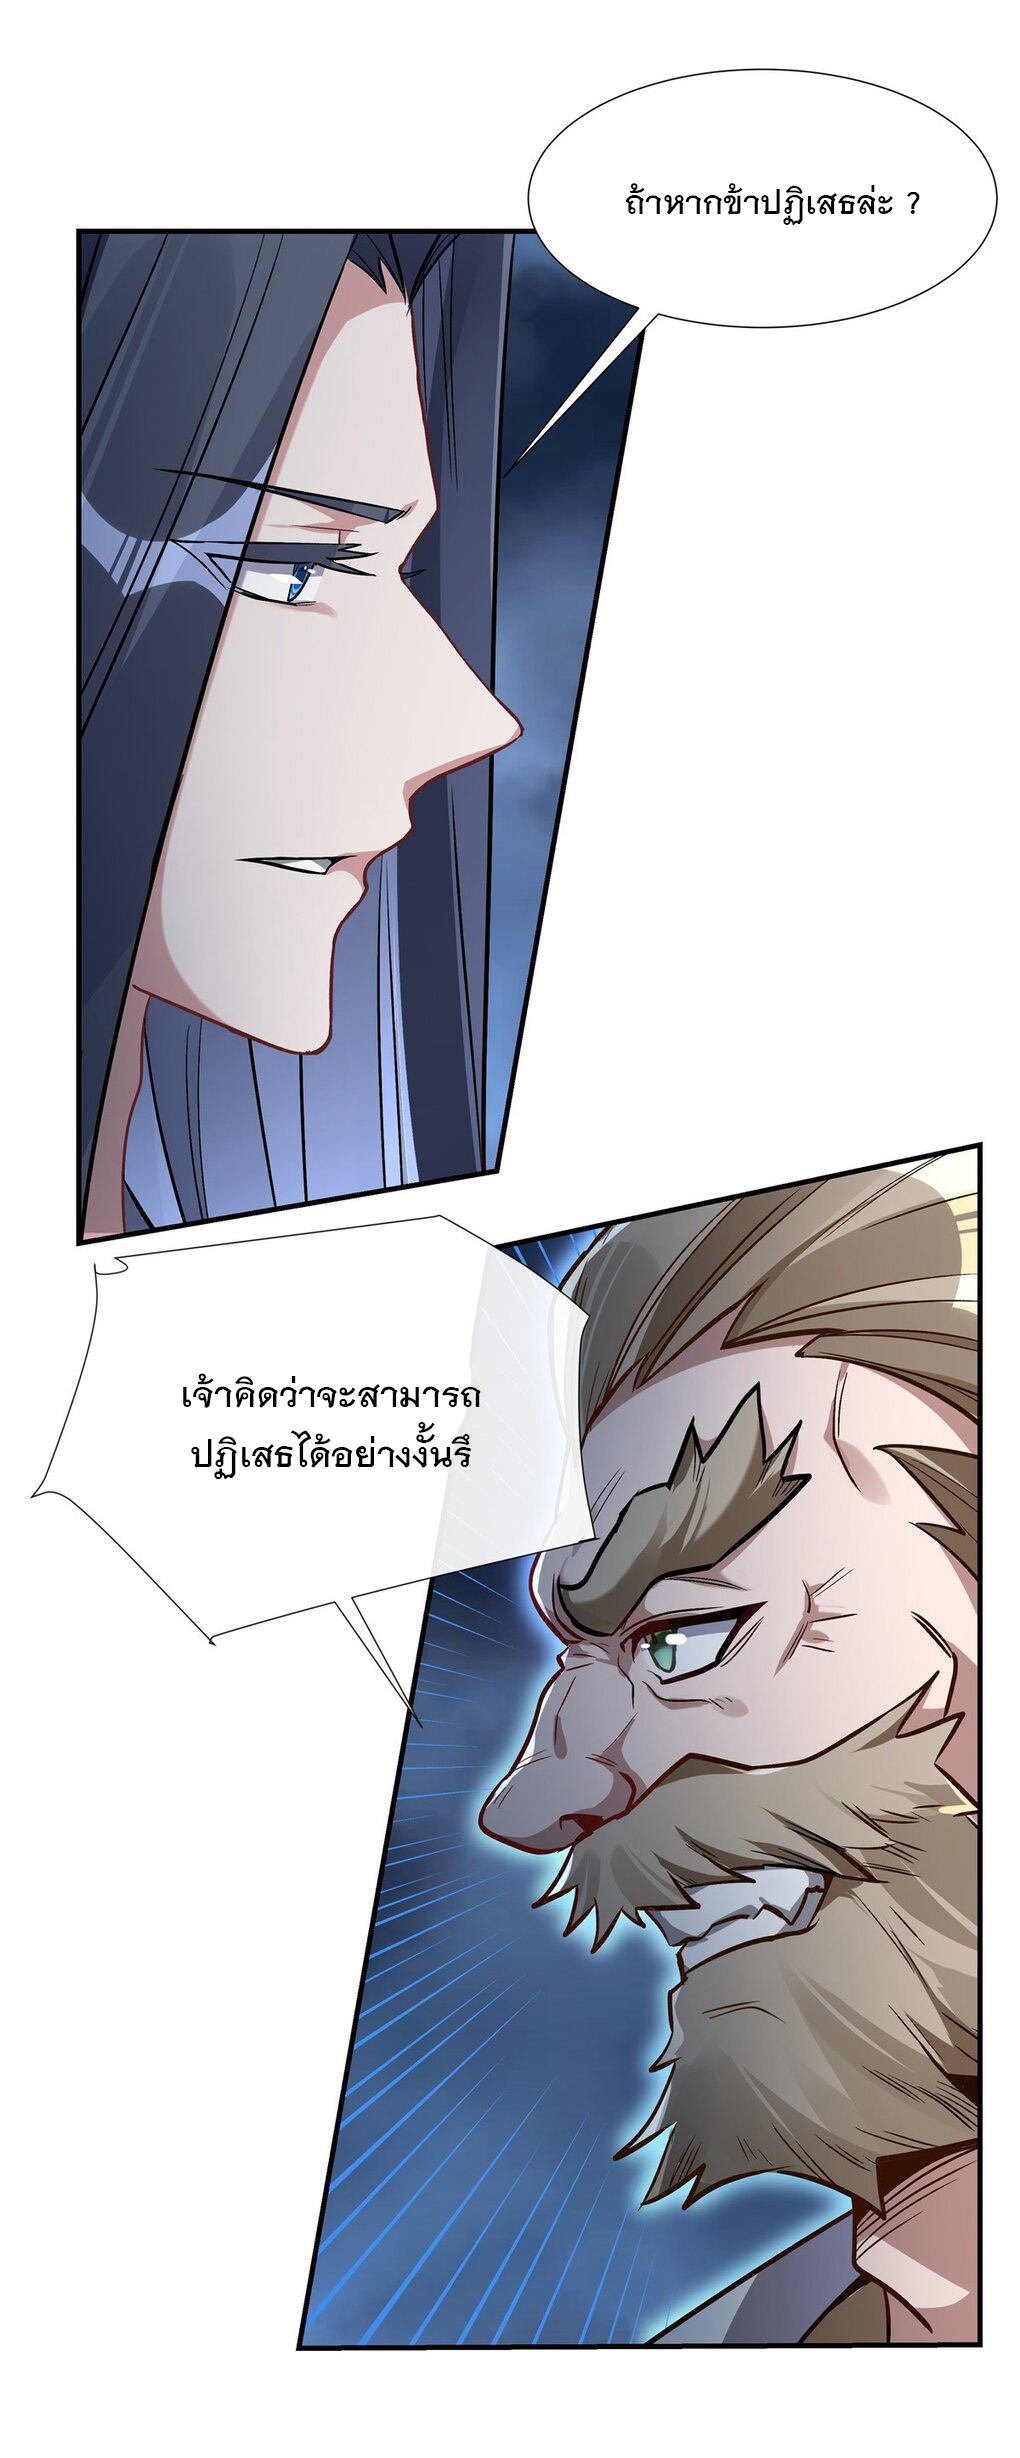 My Female Apprentices Are All Big Shots From the Future Ã Â¸â€¢Ã Â¸Â­Ã Â¸â„¢Ã Â¸â€”Ã Â¸ÂµÃ Â¹Ë† 97 (36)